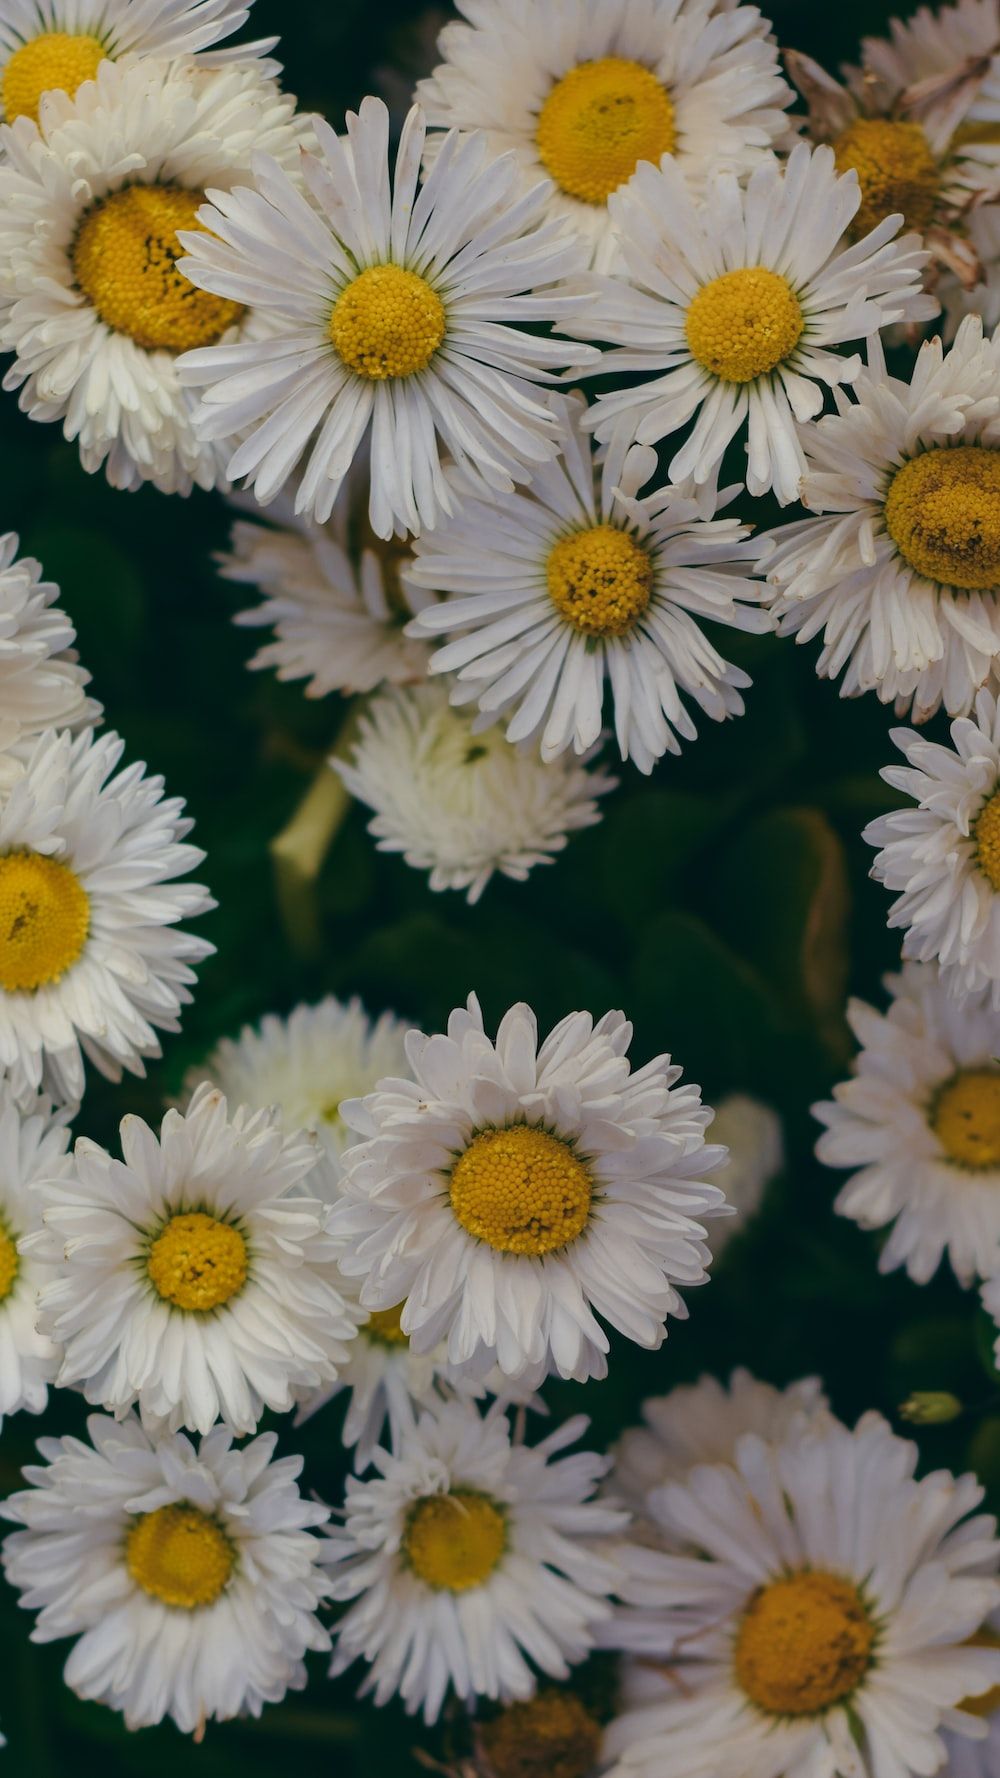 Daisy Field Picture. Download Free Image